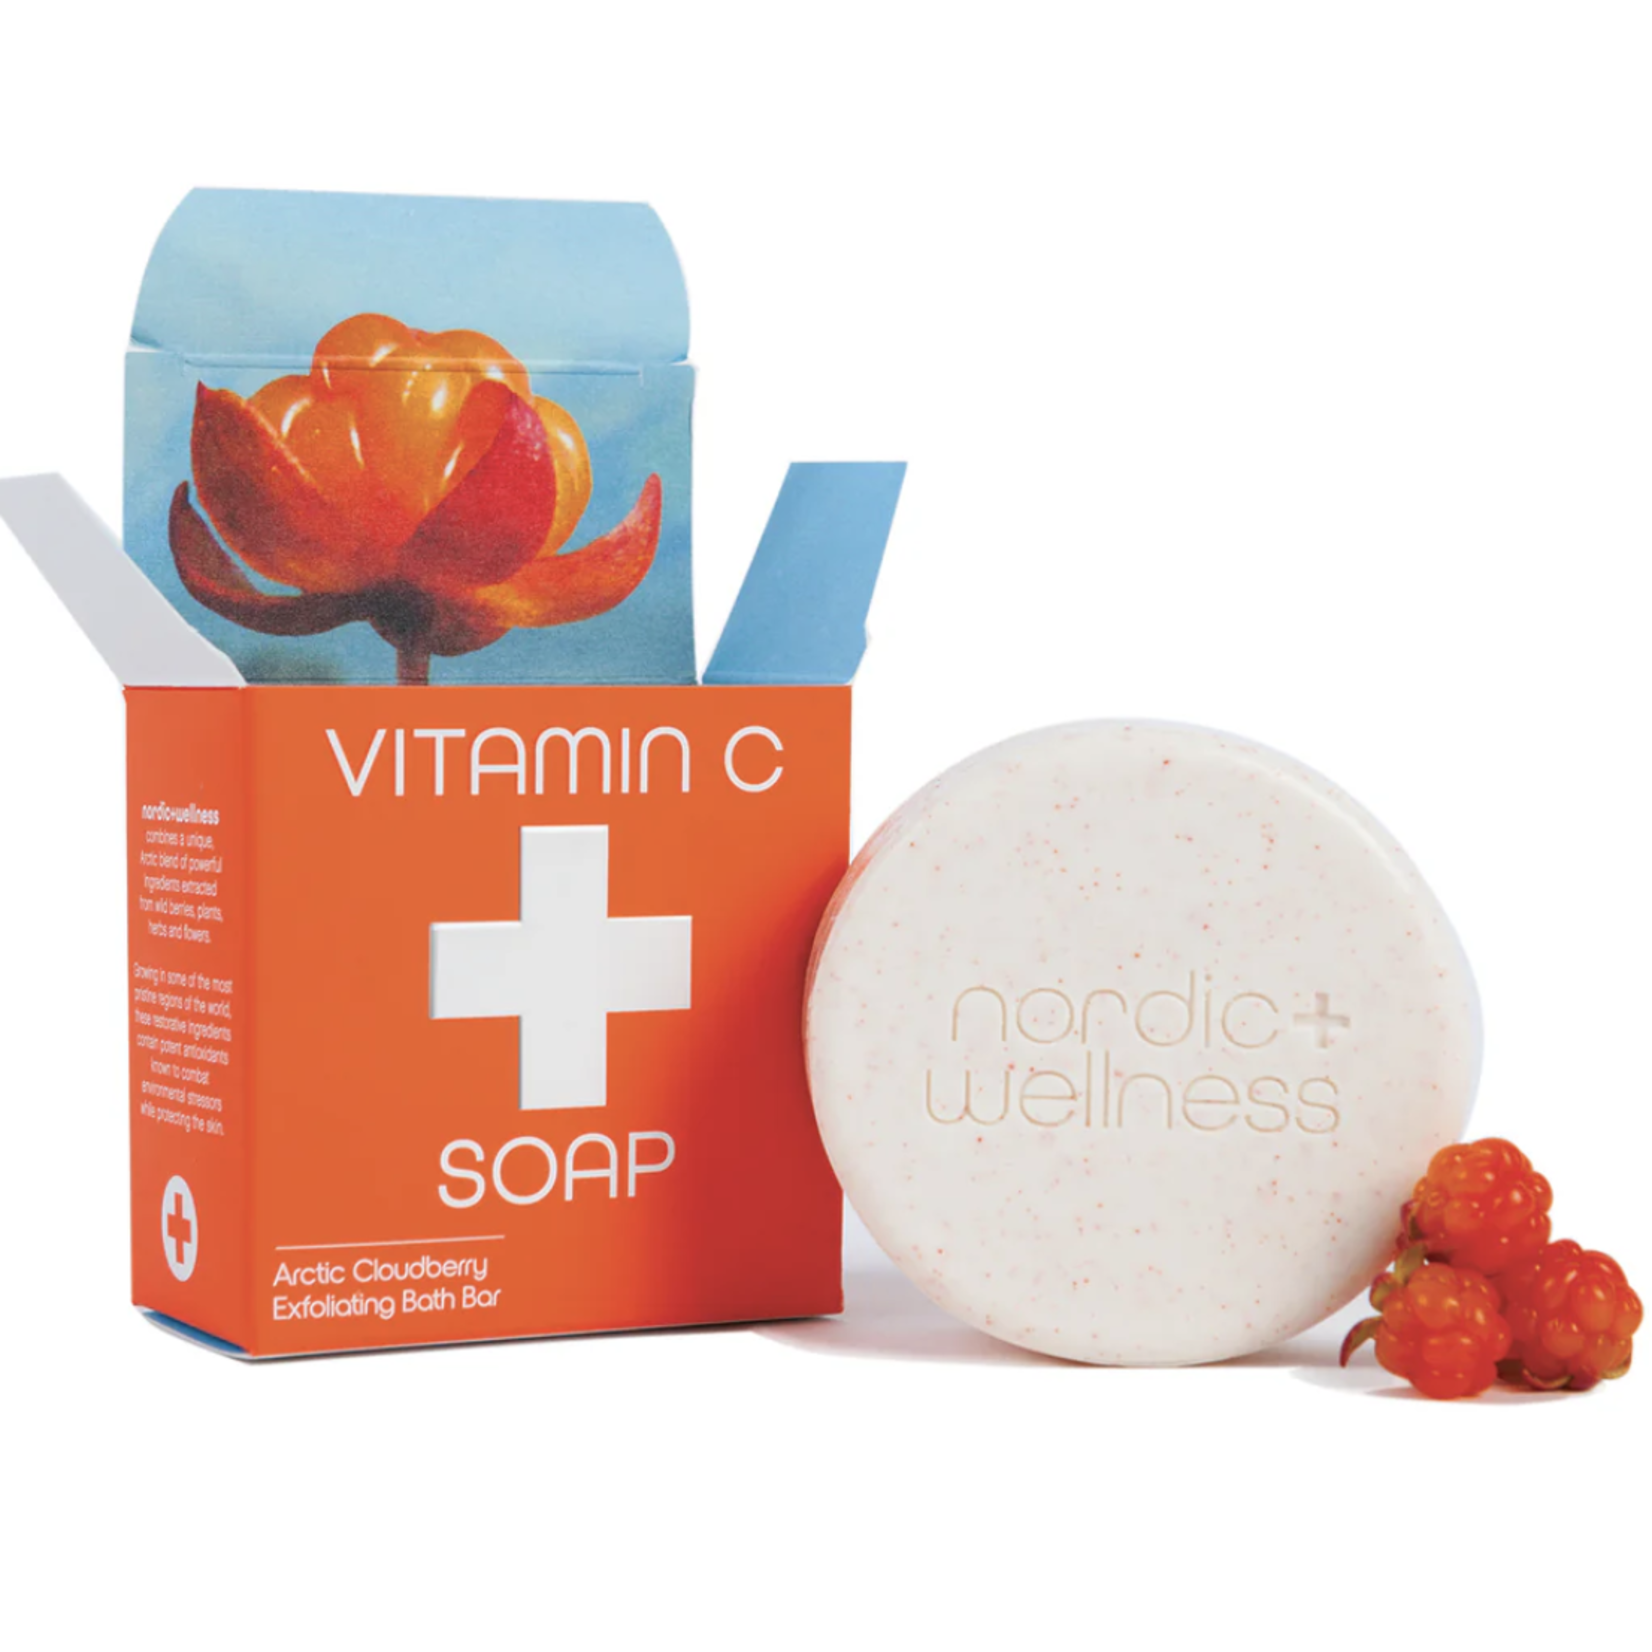 Kalastyle NORDIC + WELLNESS VITAMIN C SOAP WITH ARCTIC CLOUDBERRY